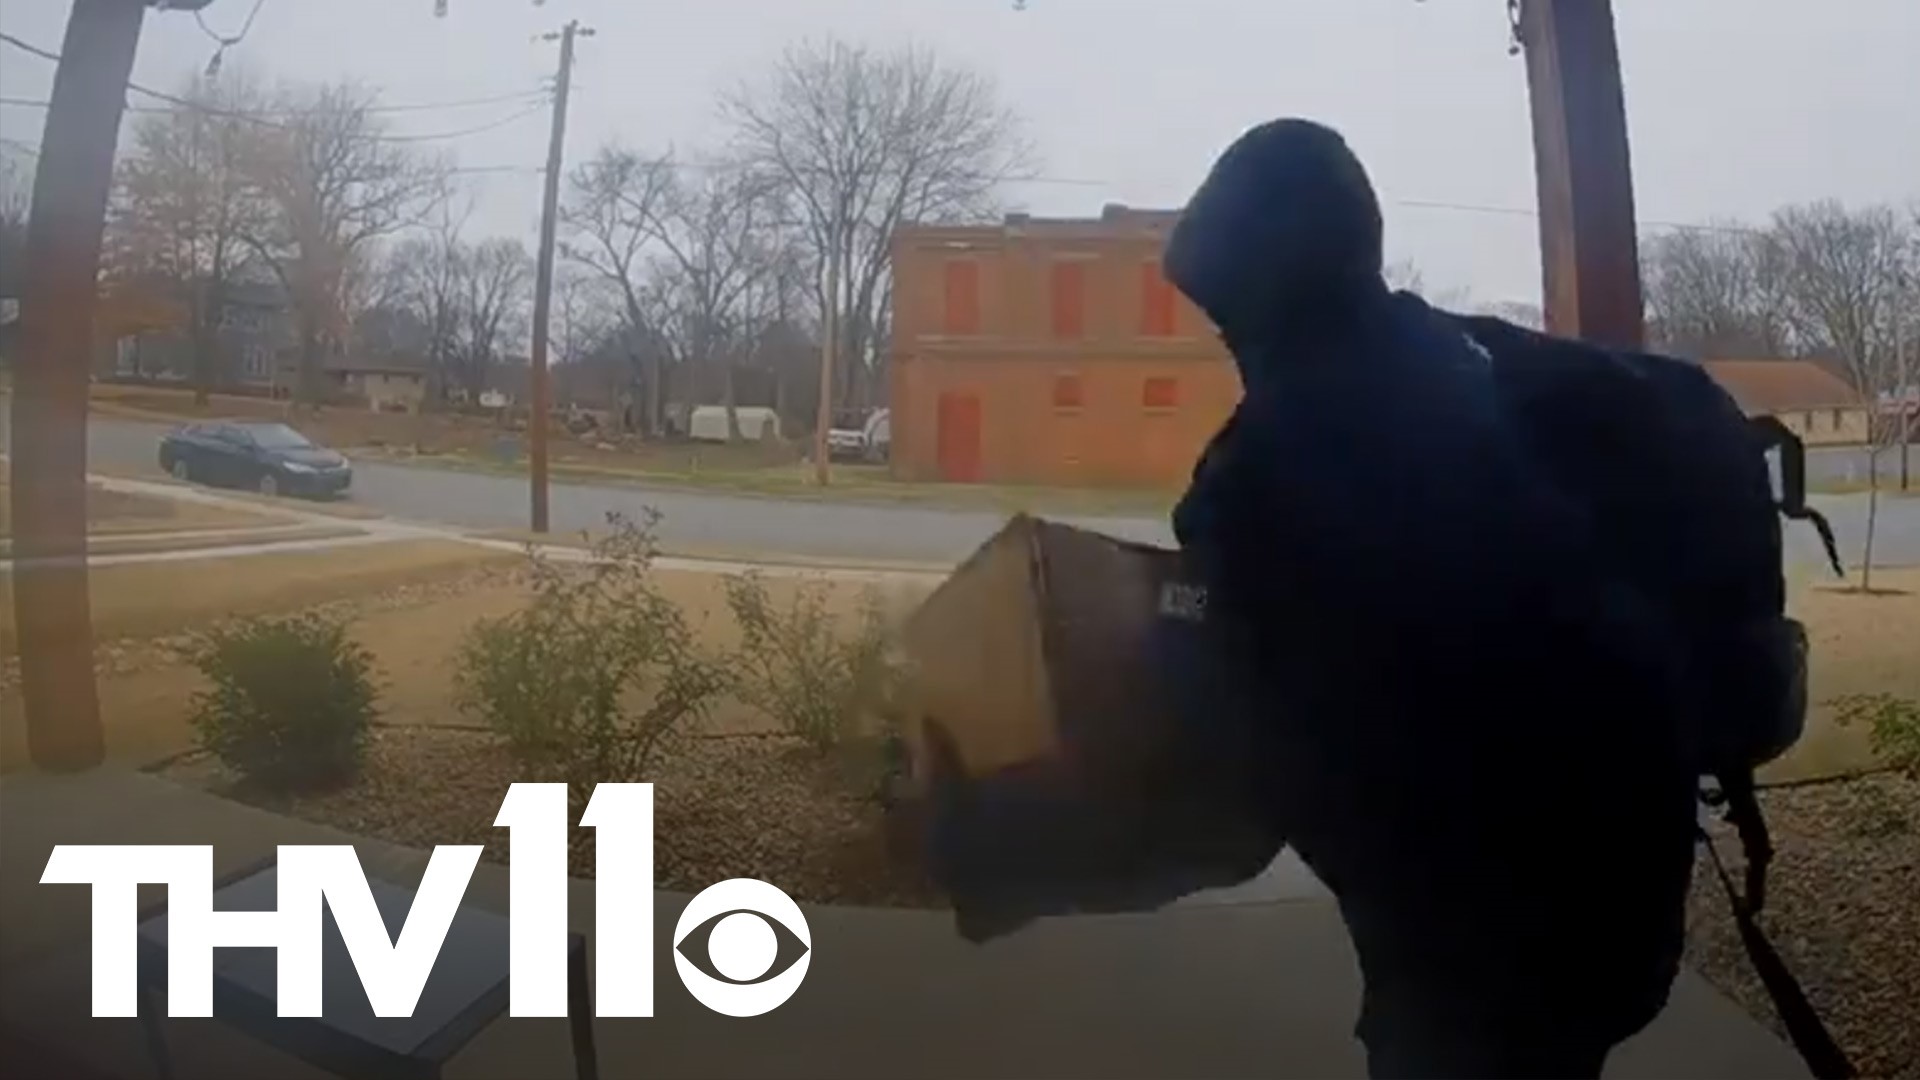 Because of smart cameras like Ring, porch pirates are being exposed this holiday season and Little Rock police are working on plans to combat them.